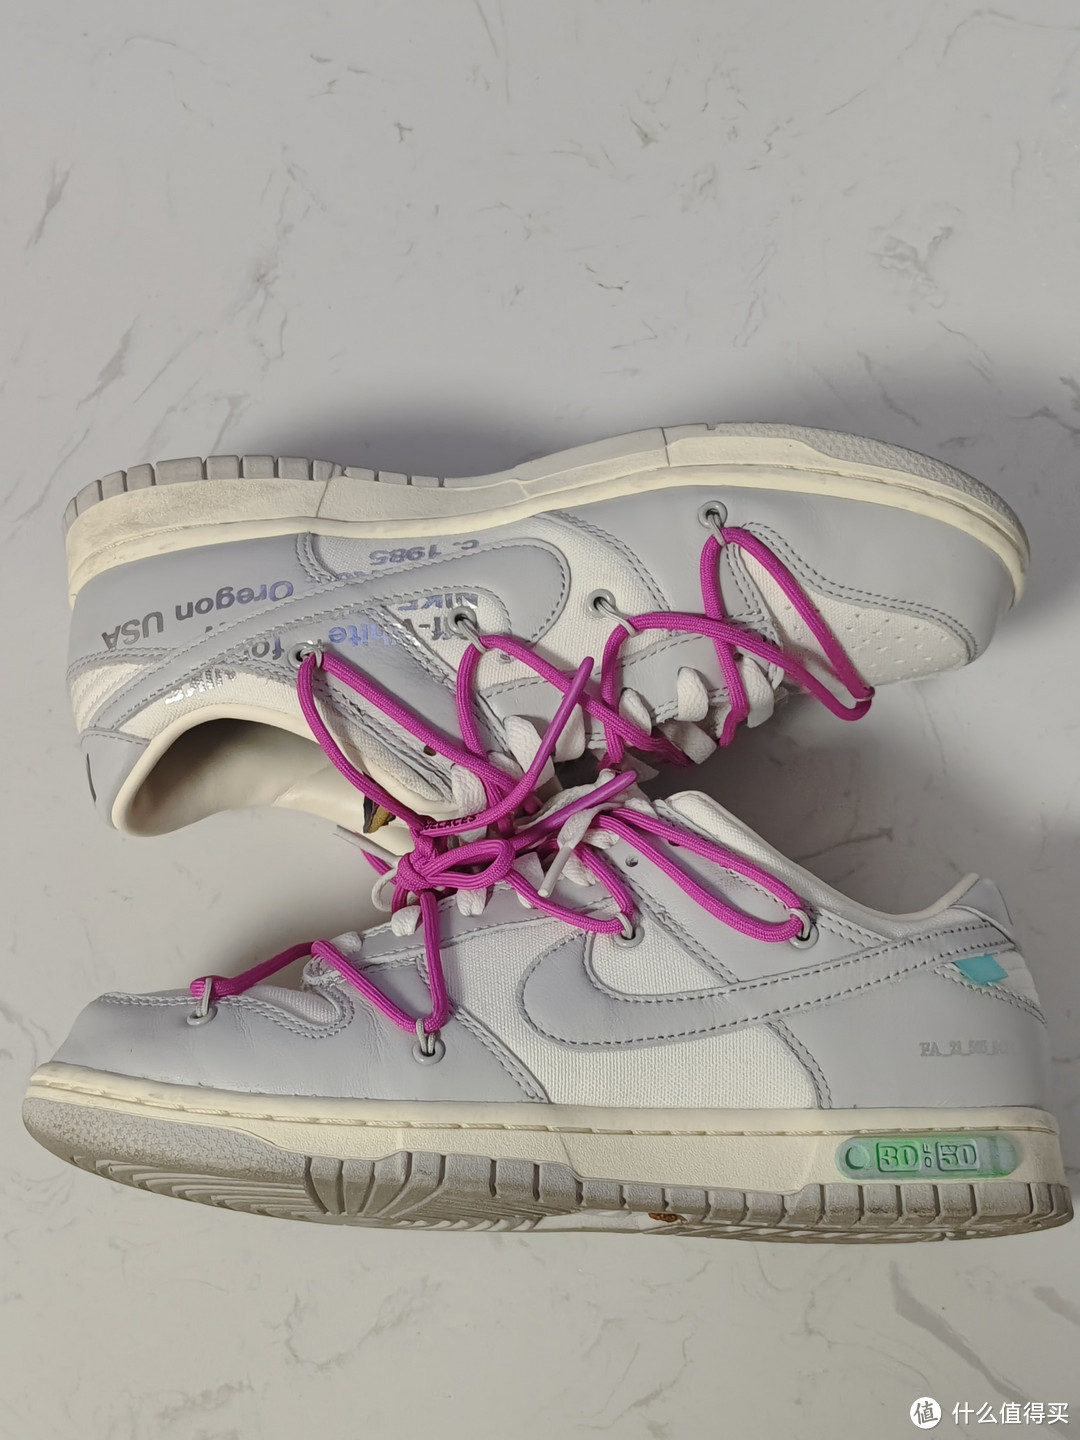 Nike Off-White Dunk Low 运动休闲鞋，帅气好穿！